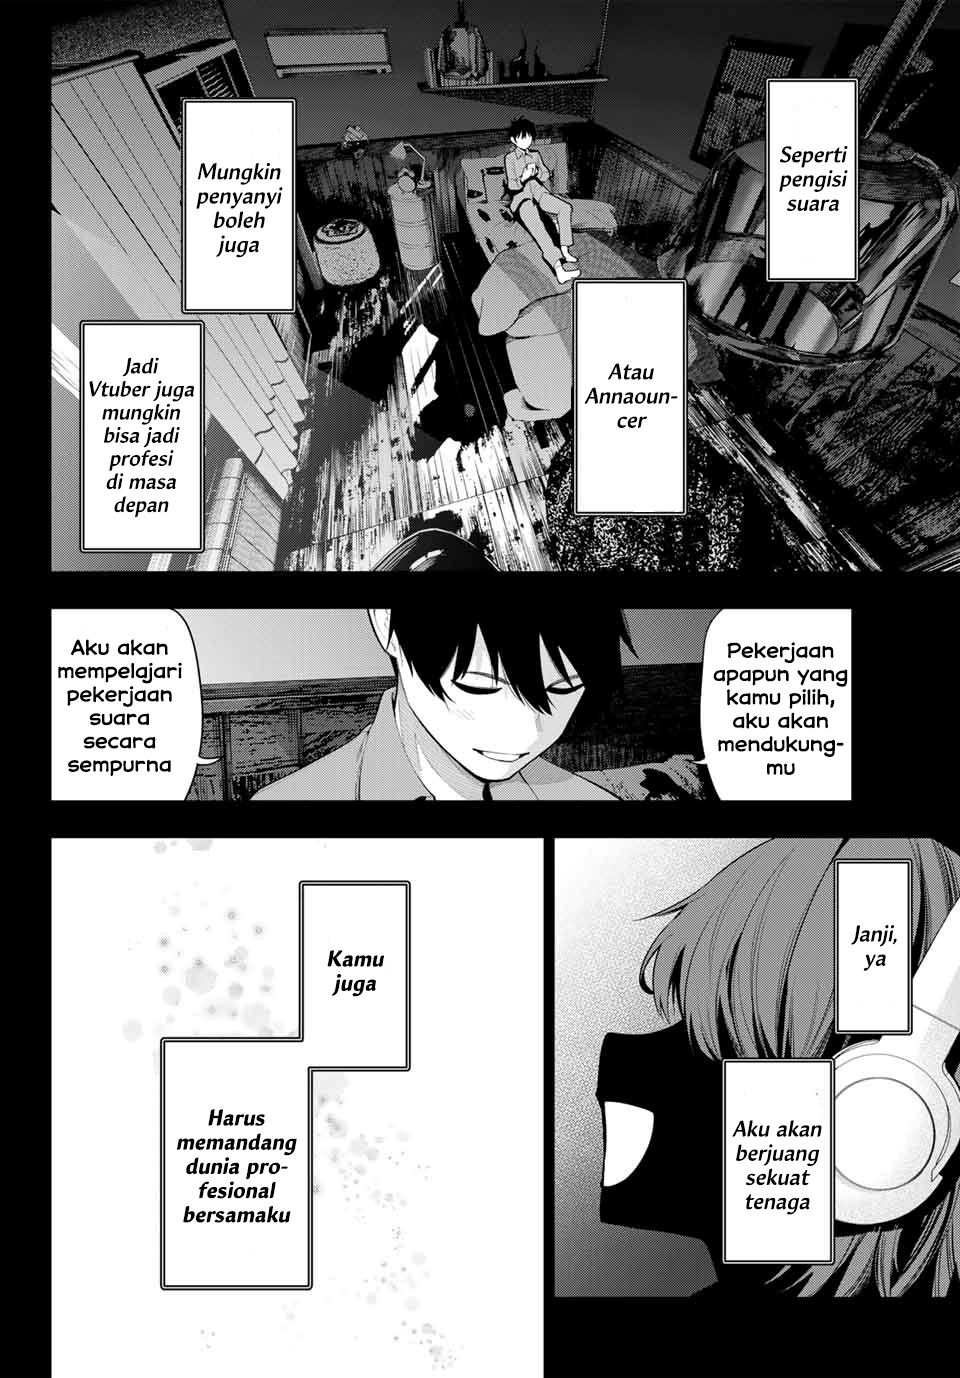 Mayonaka Heart Tune (Tune In to the Midnight Heart) Chapter 02 Image 31